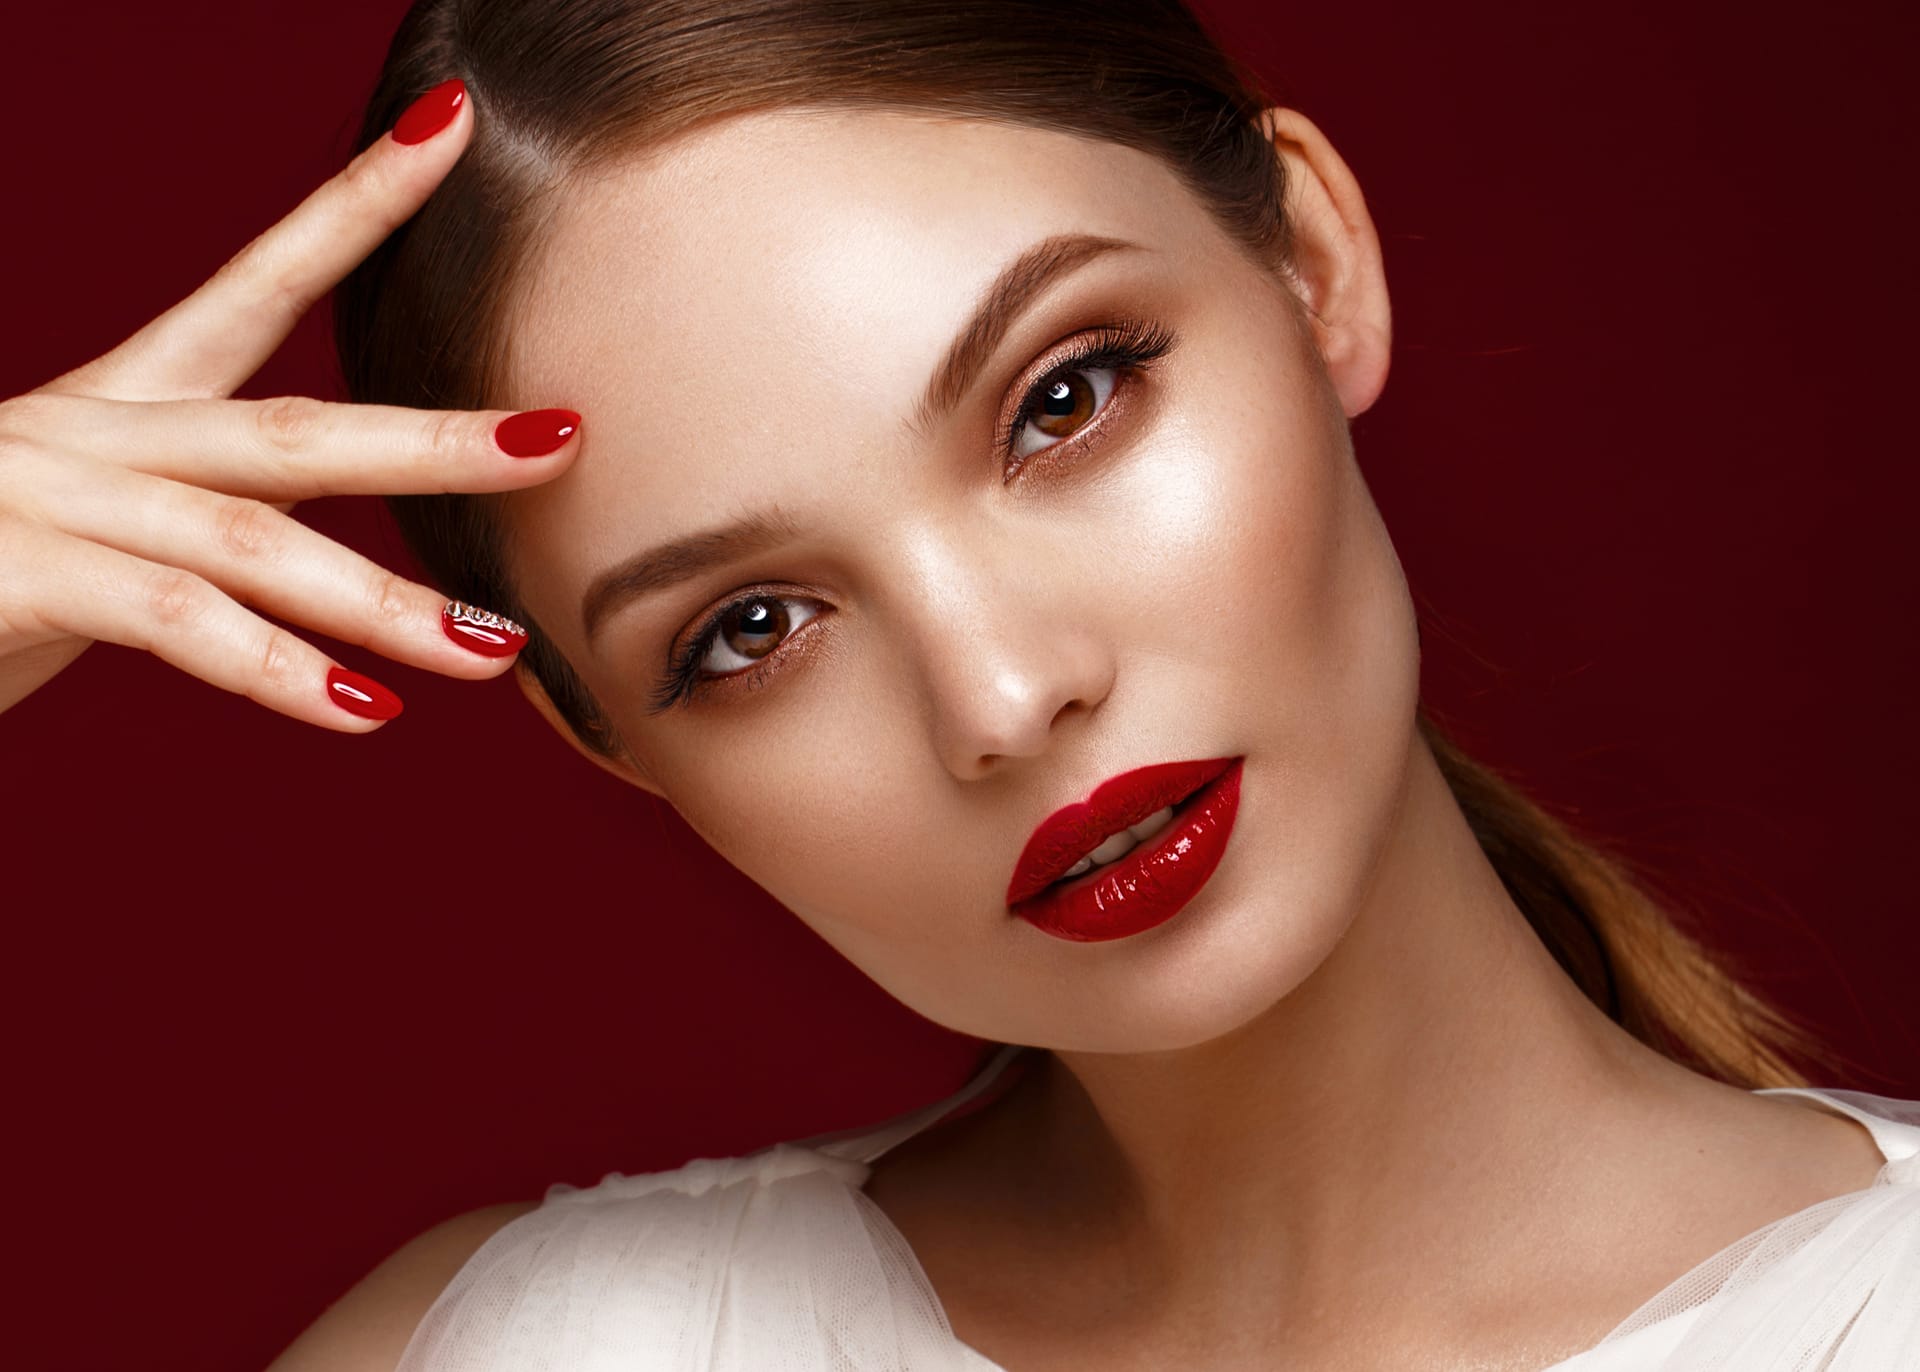 With classic makeup red manicure beauty face photo taken studio